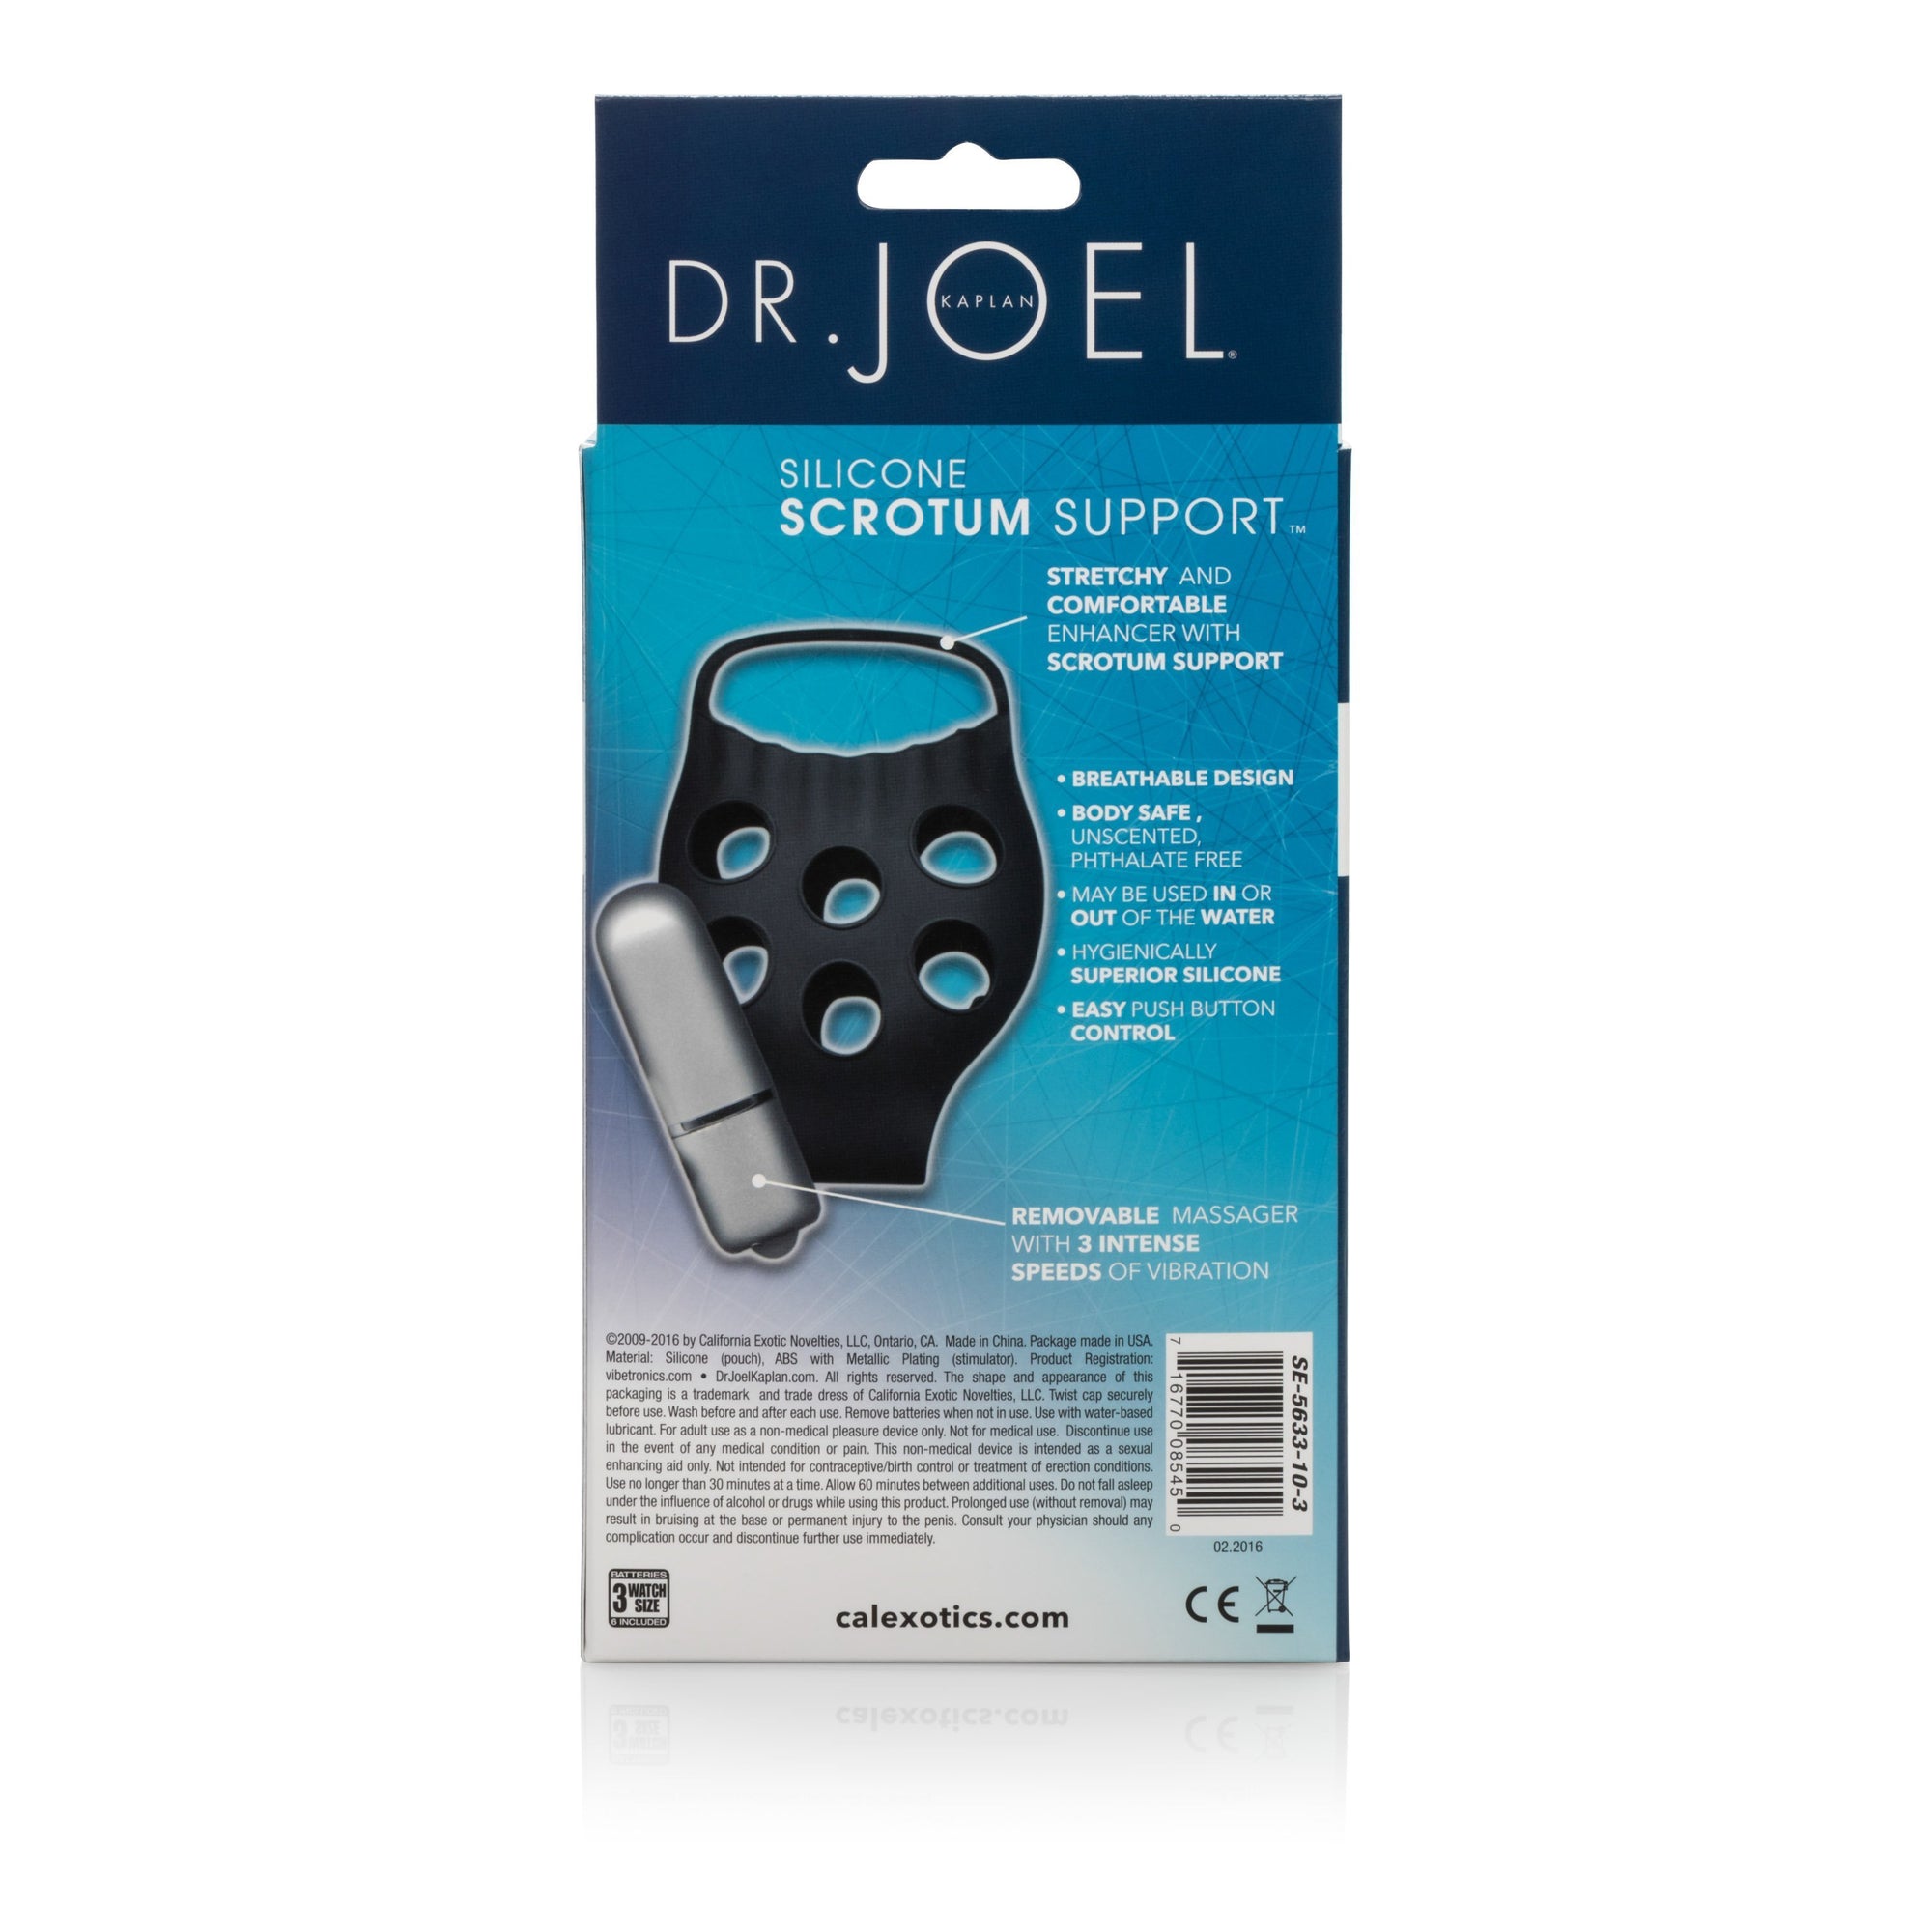 California Exotics - Dr. Joel Kaplan Silicone Scrotum Support (Black) Silicone Cock Ring (Vibration) Non Rechargeable Singapore